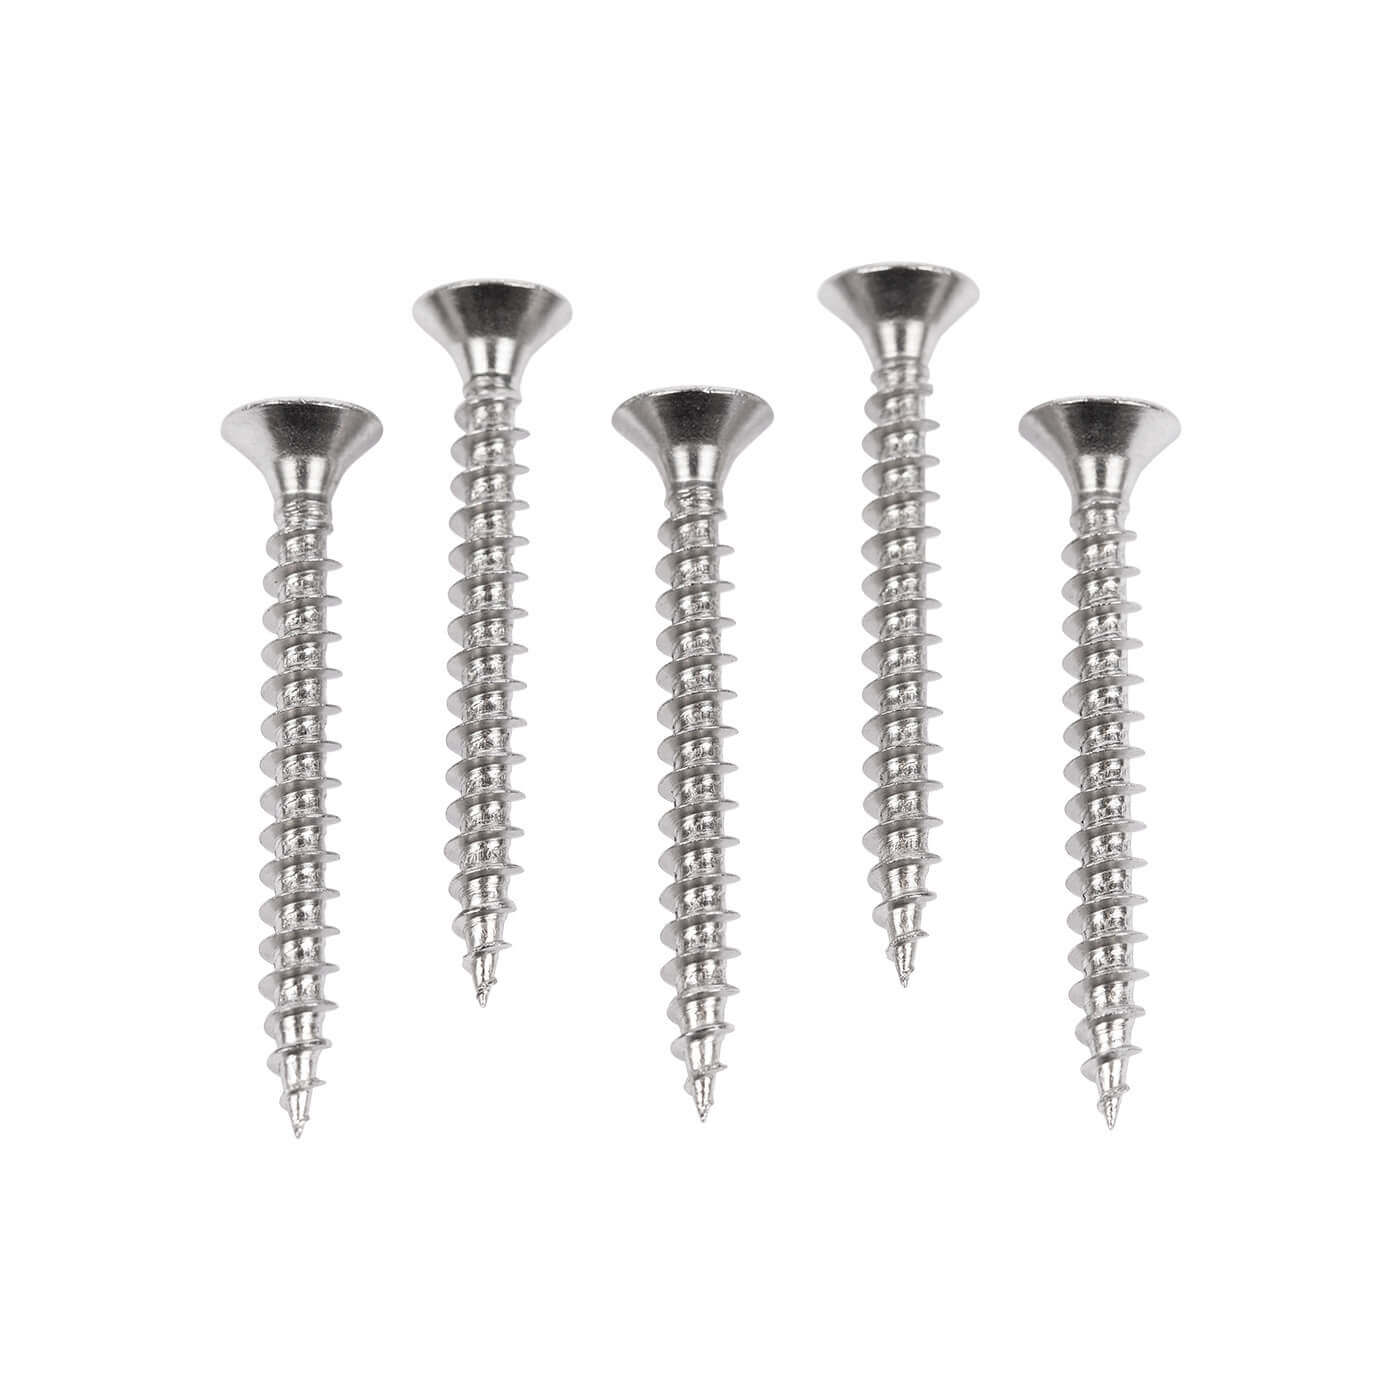 Hydrant Screw Replacements - 5 Pack